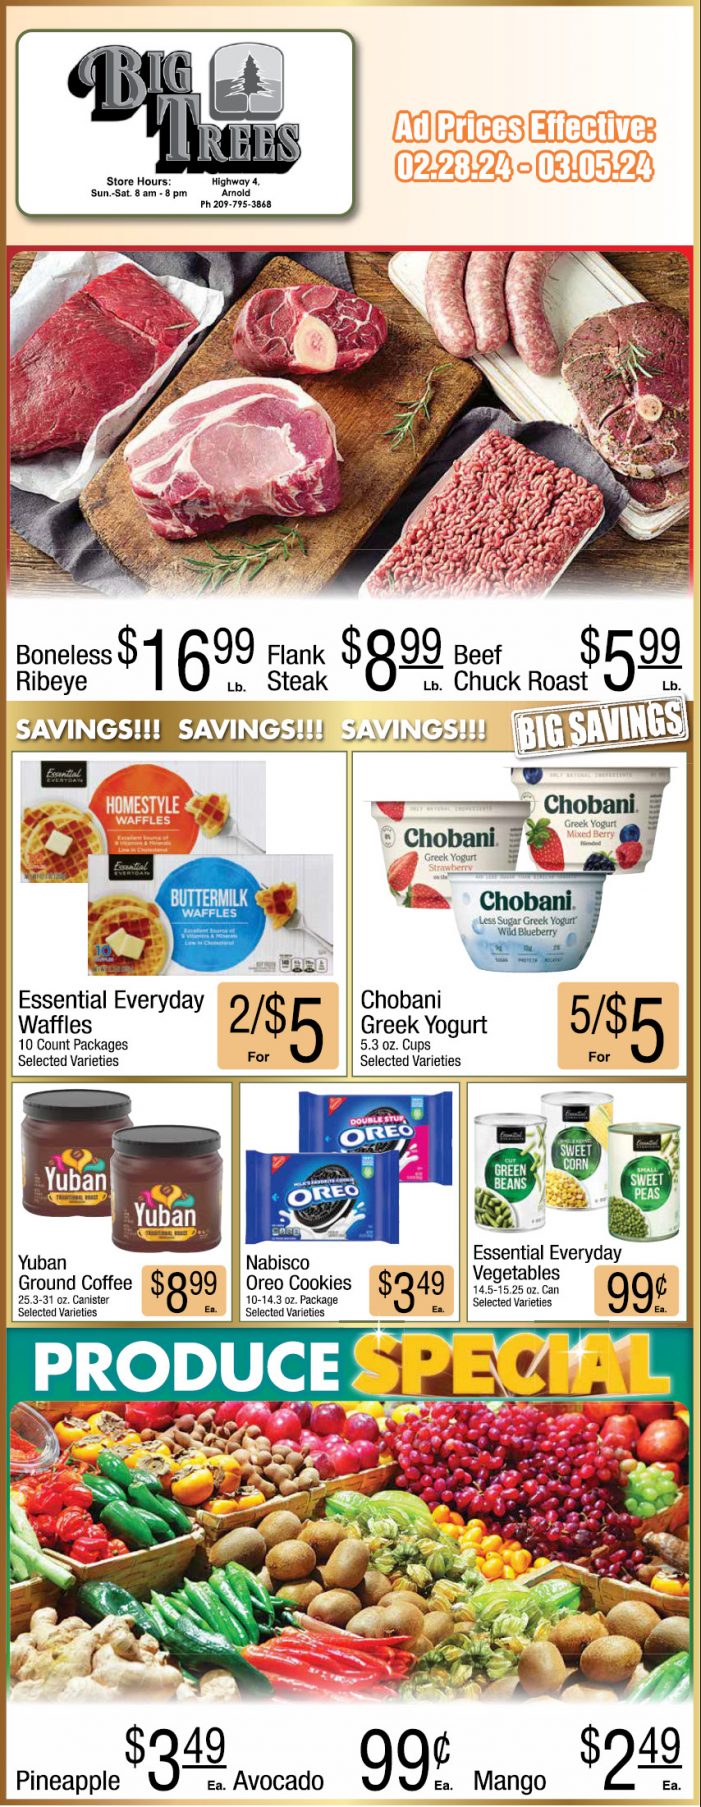 Big Trees Market Weekly Ad, Grocery, Produce, Meat & Deli Specials Through March 5th! Shop Local & Save!